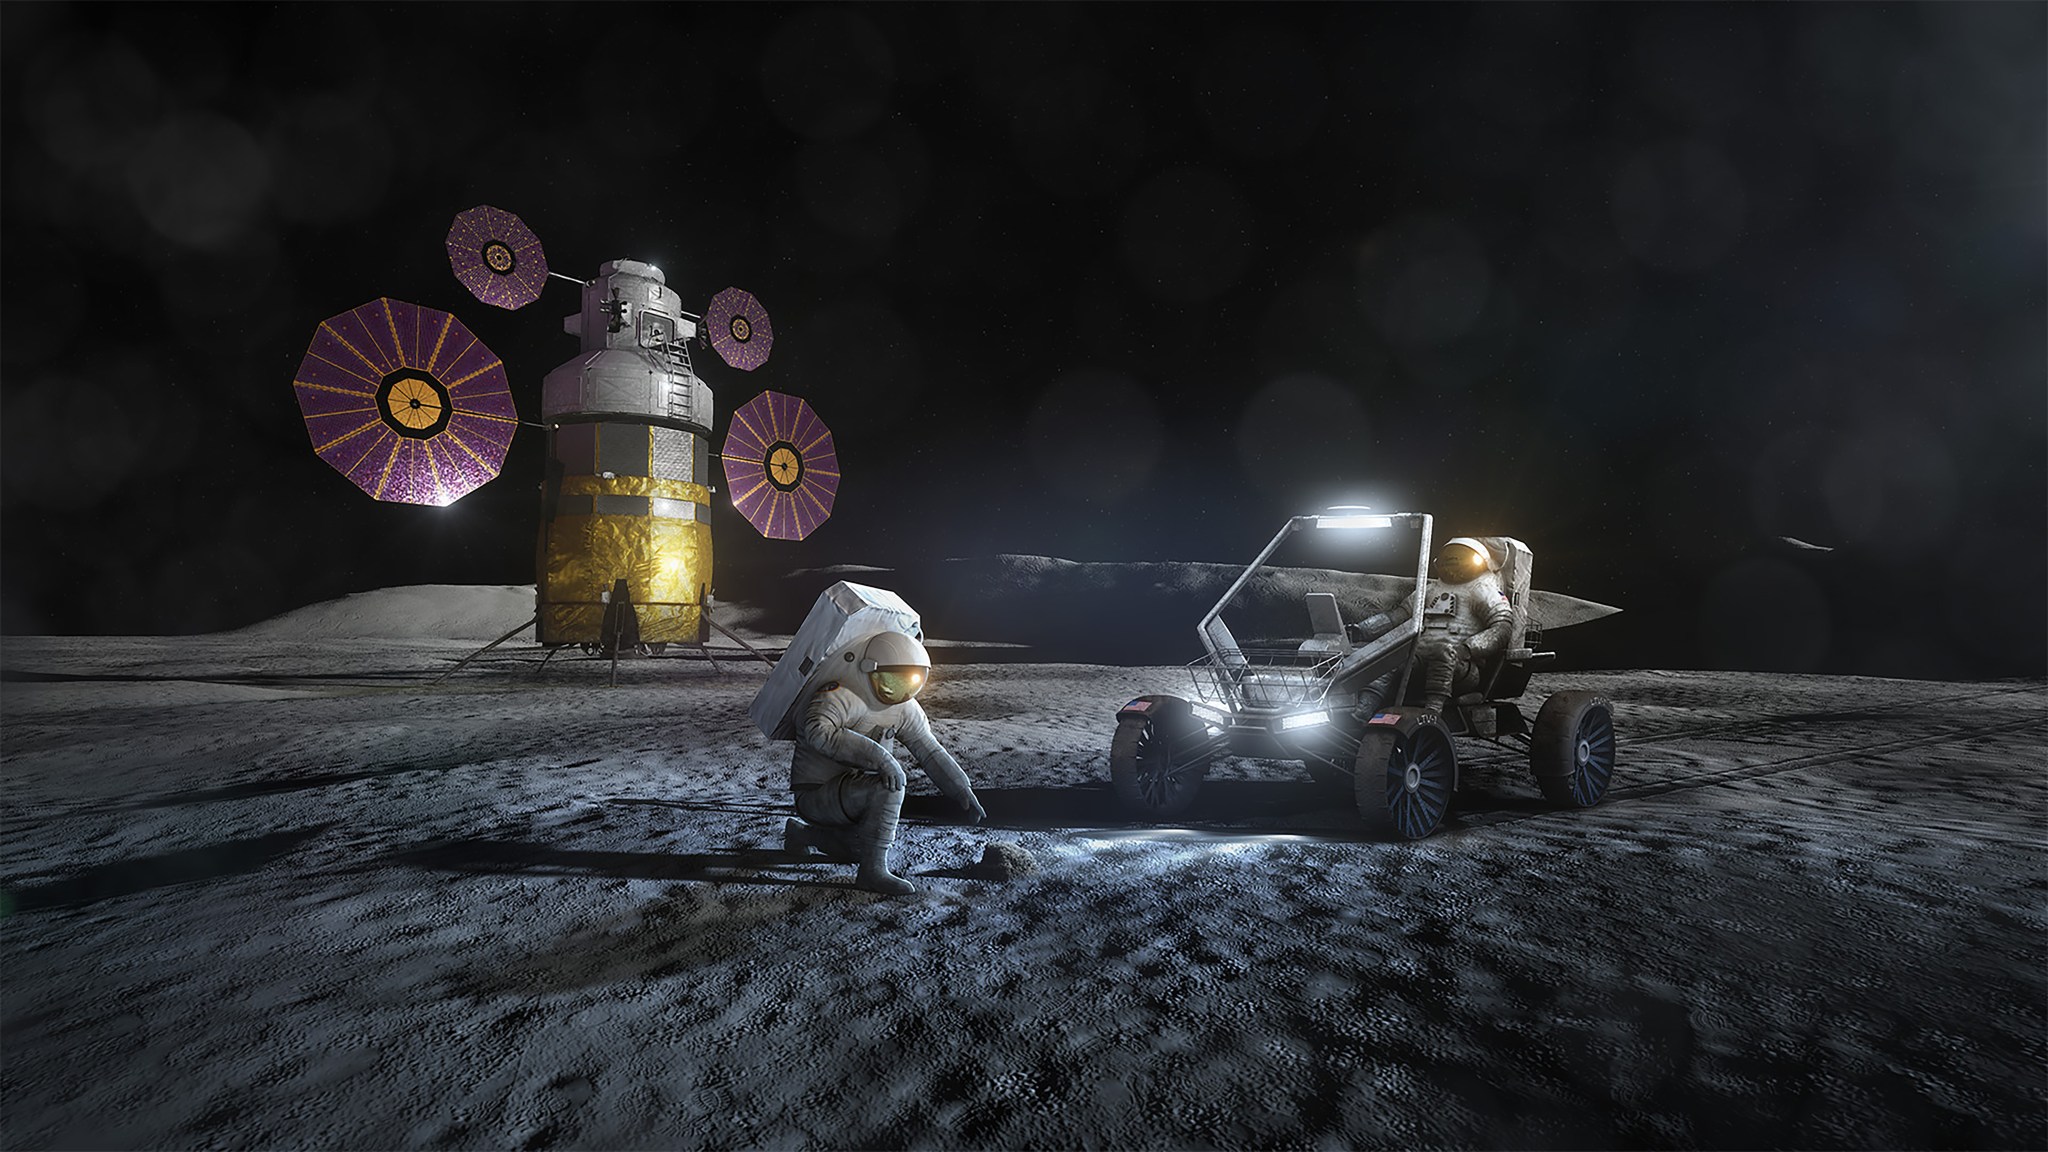 An artist's concept illustration of an astronaut kneeling down and working on the surface of the Moon with another astronaut sitting in a nearby Lunar Terrain Vehicle.